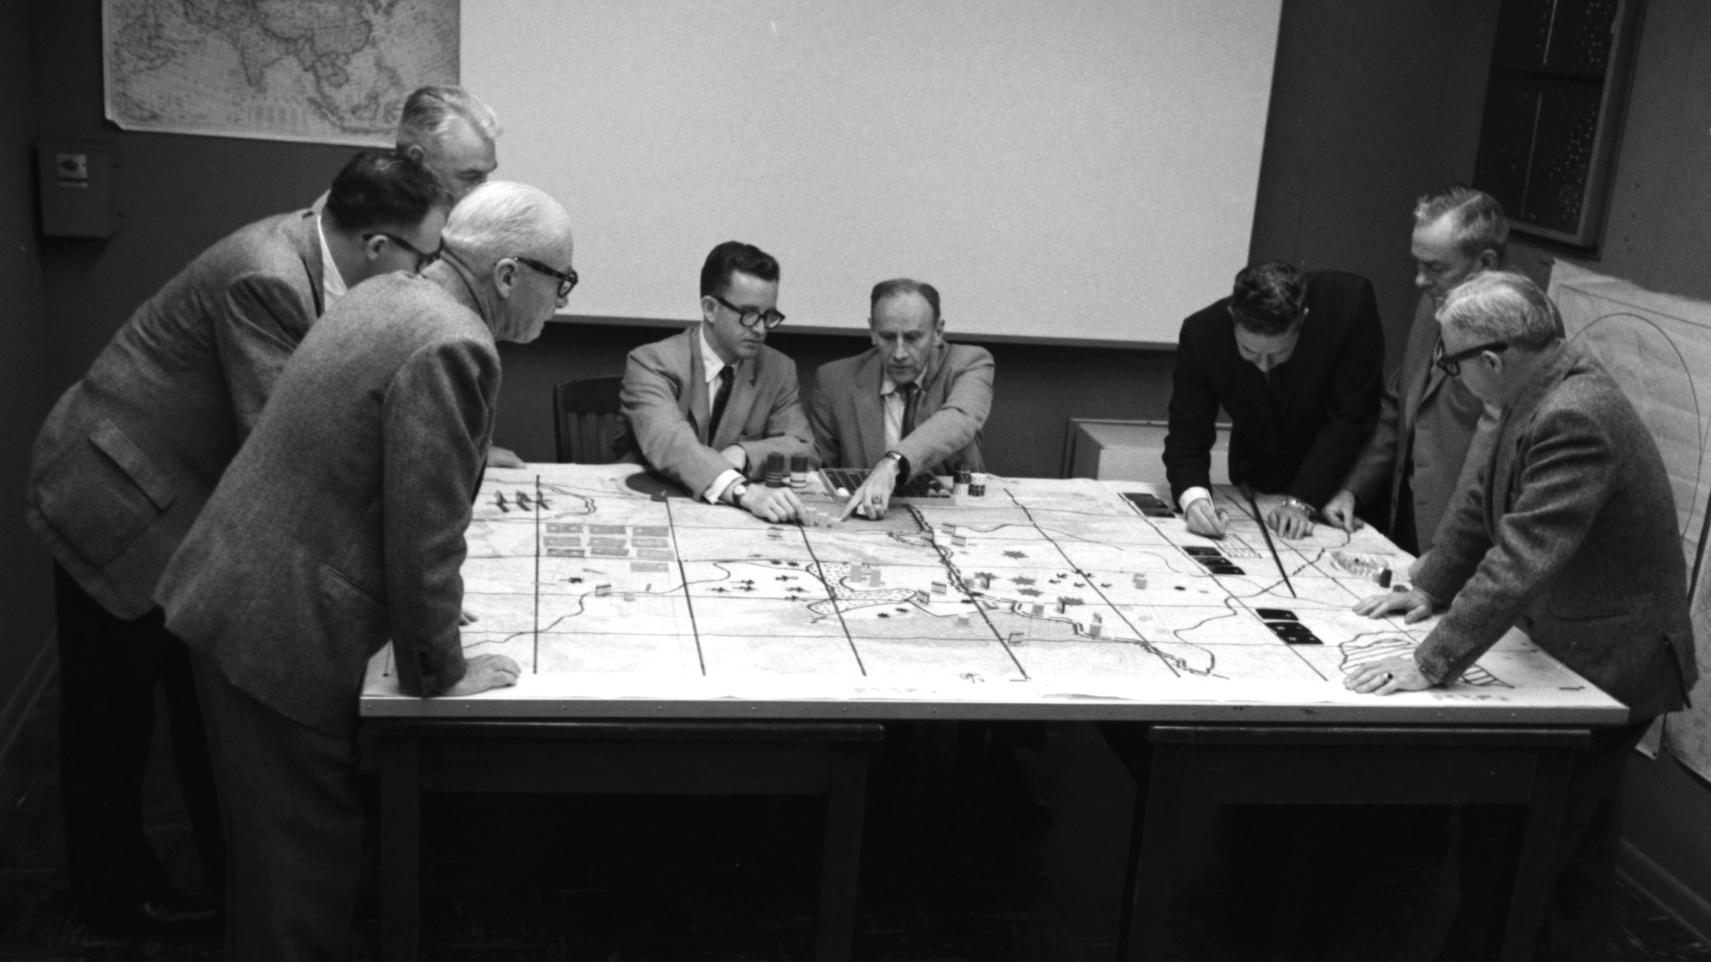 Engineering Operations game, 1966, with Milton Weiner (3rd from right), Olaf Helmer (2nd from right), and others